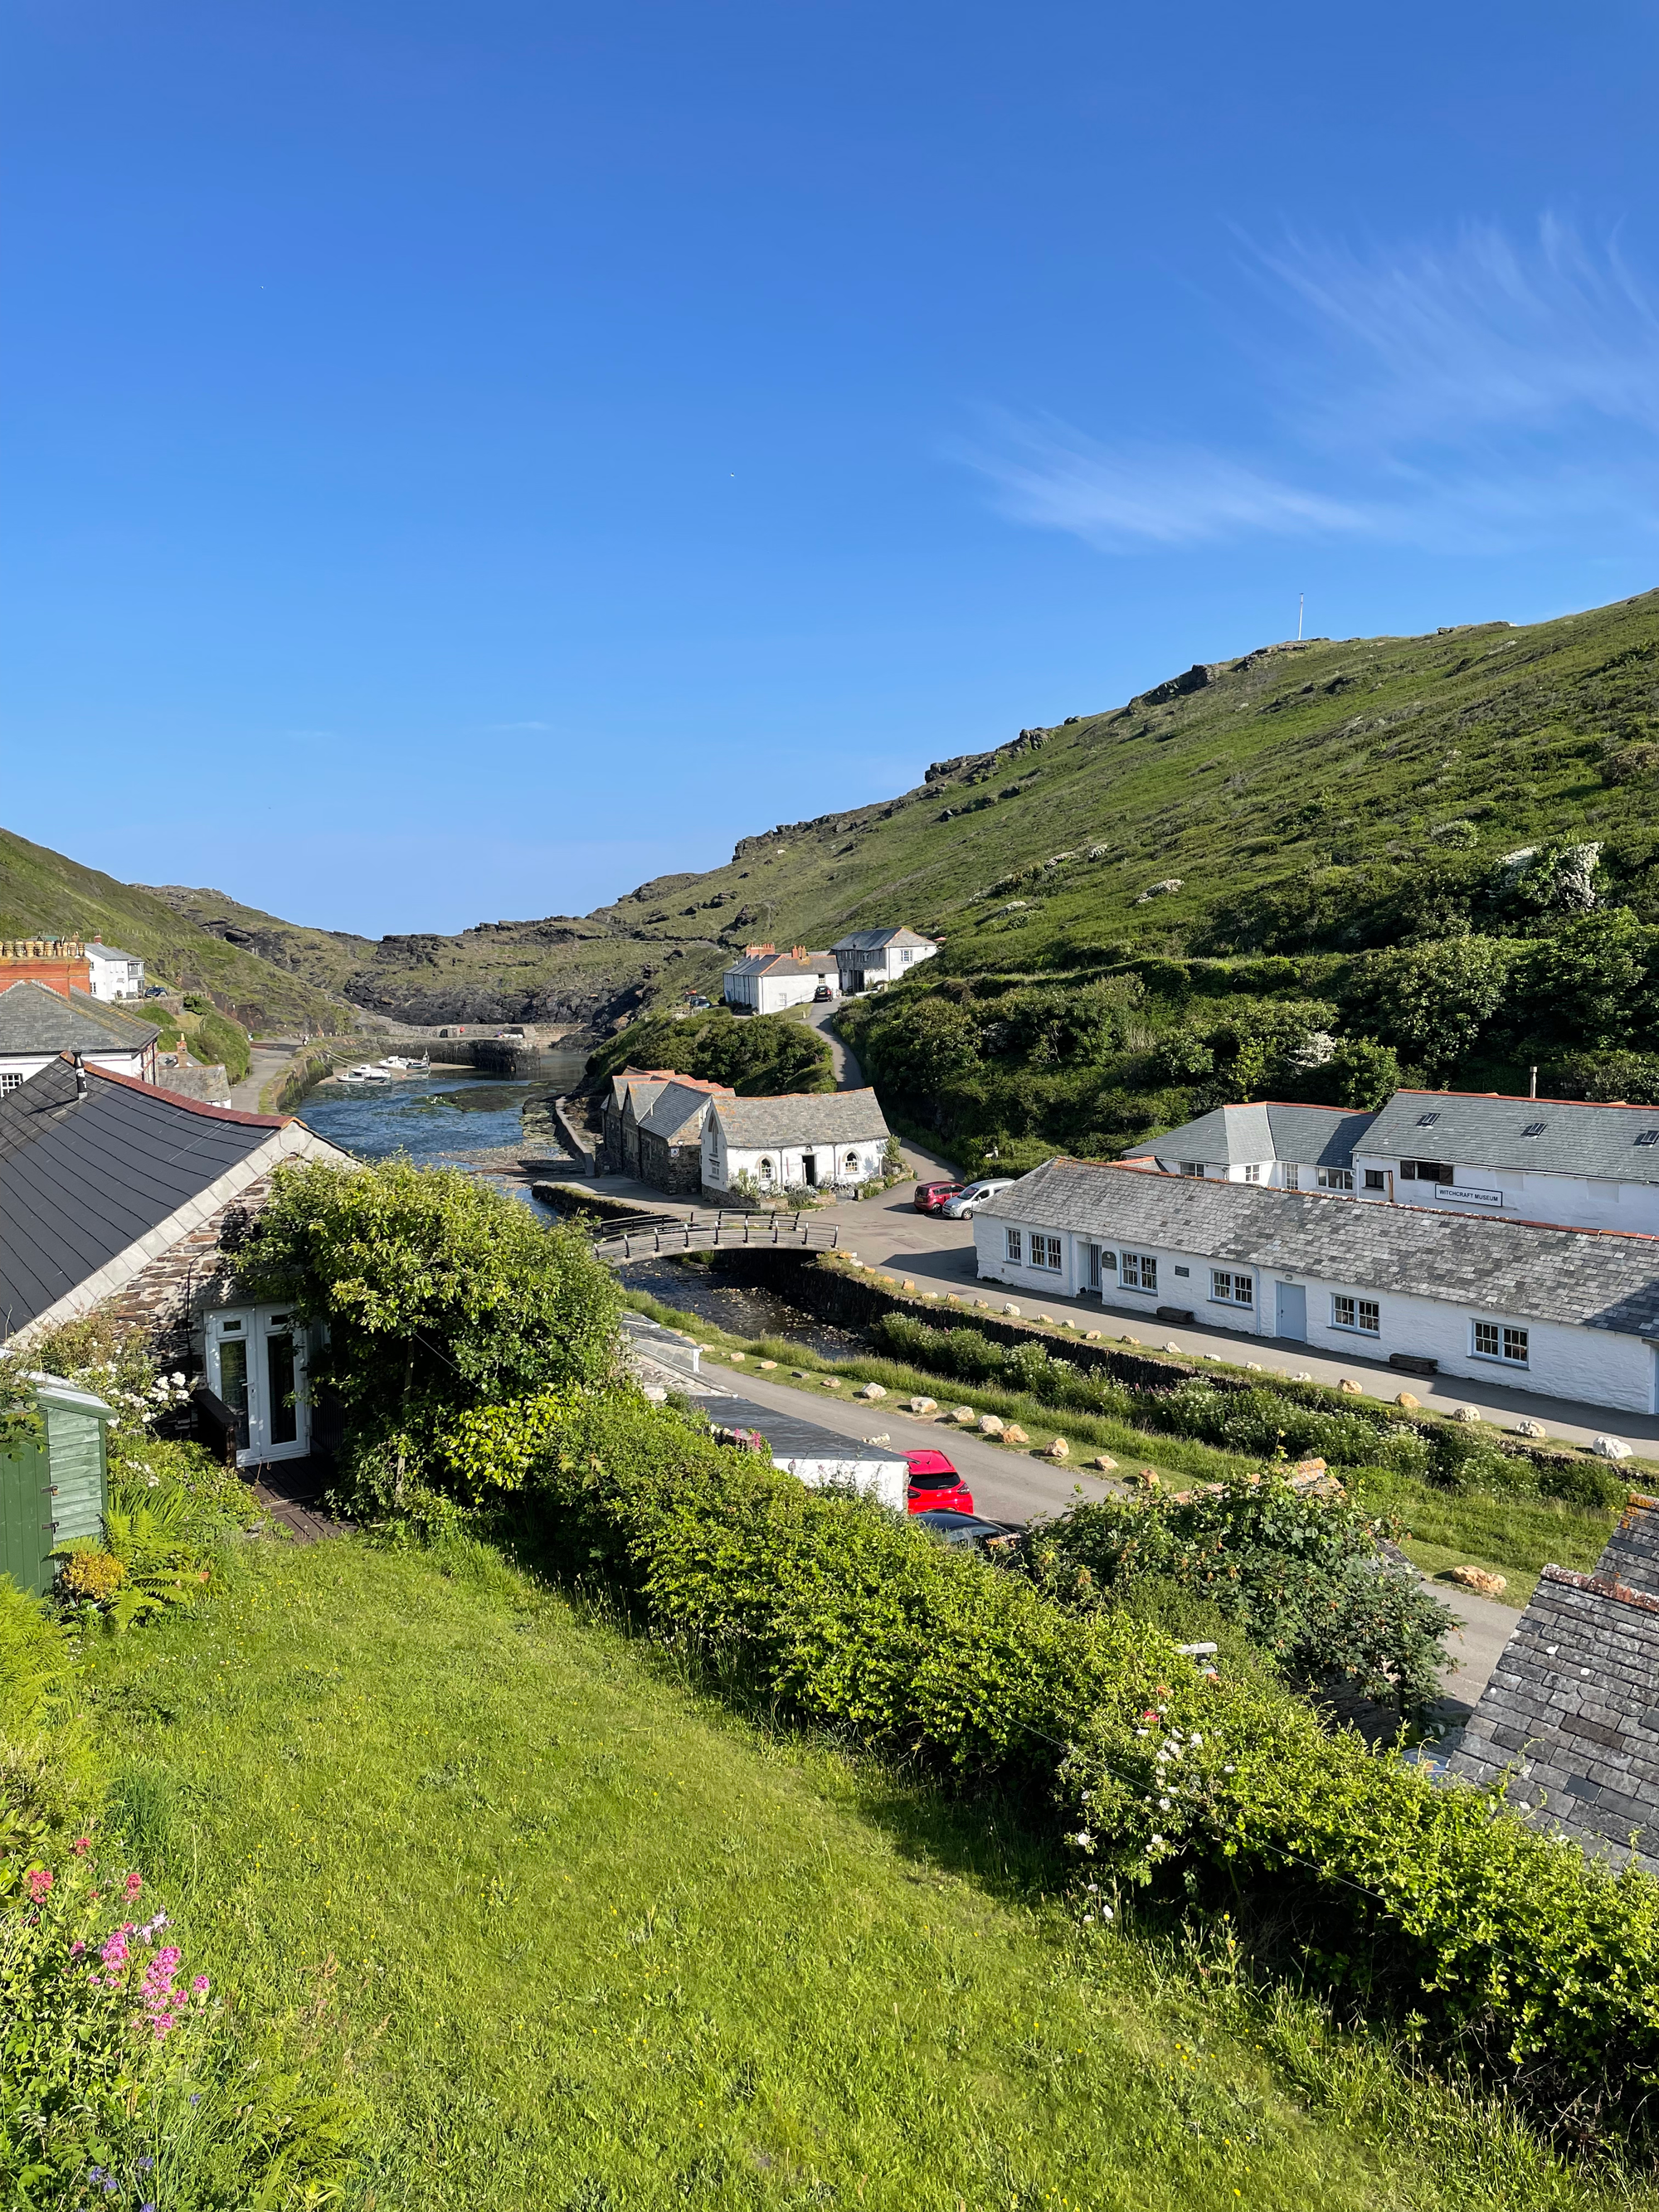 Day 13 - Leaving Boscastle on yet another beautiful morning